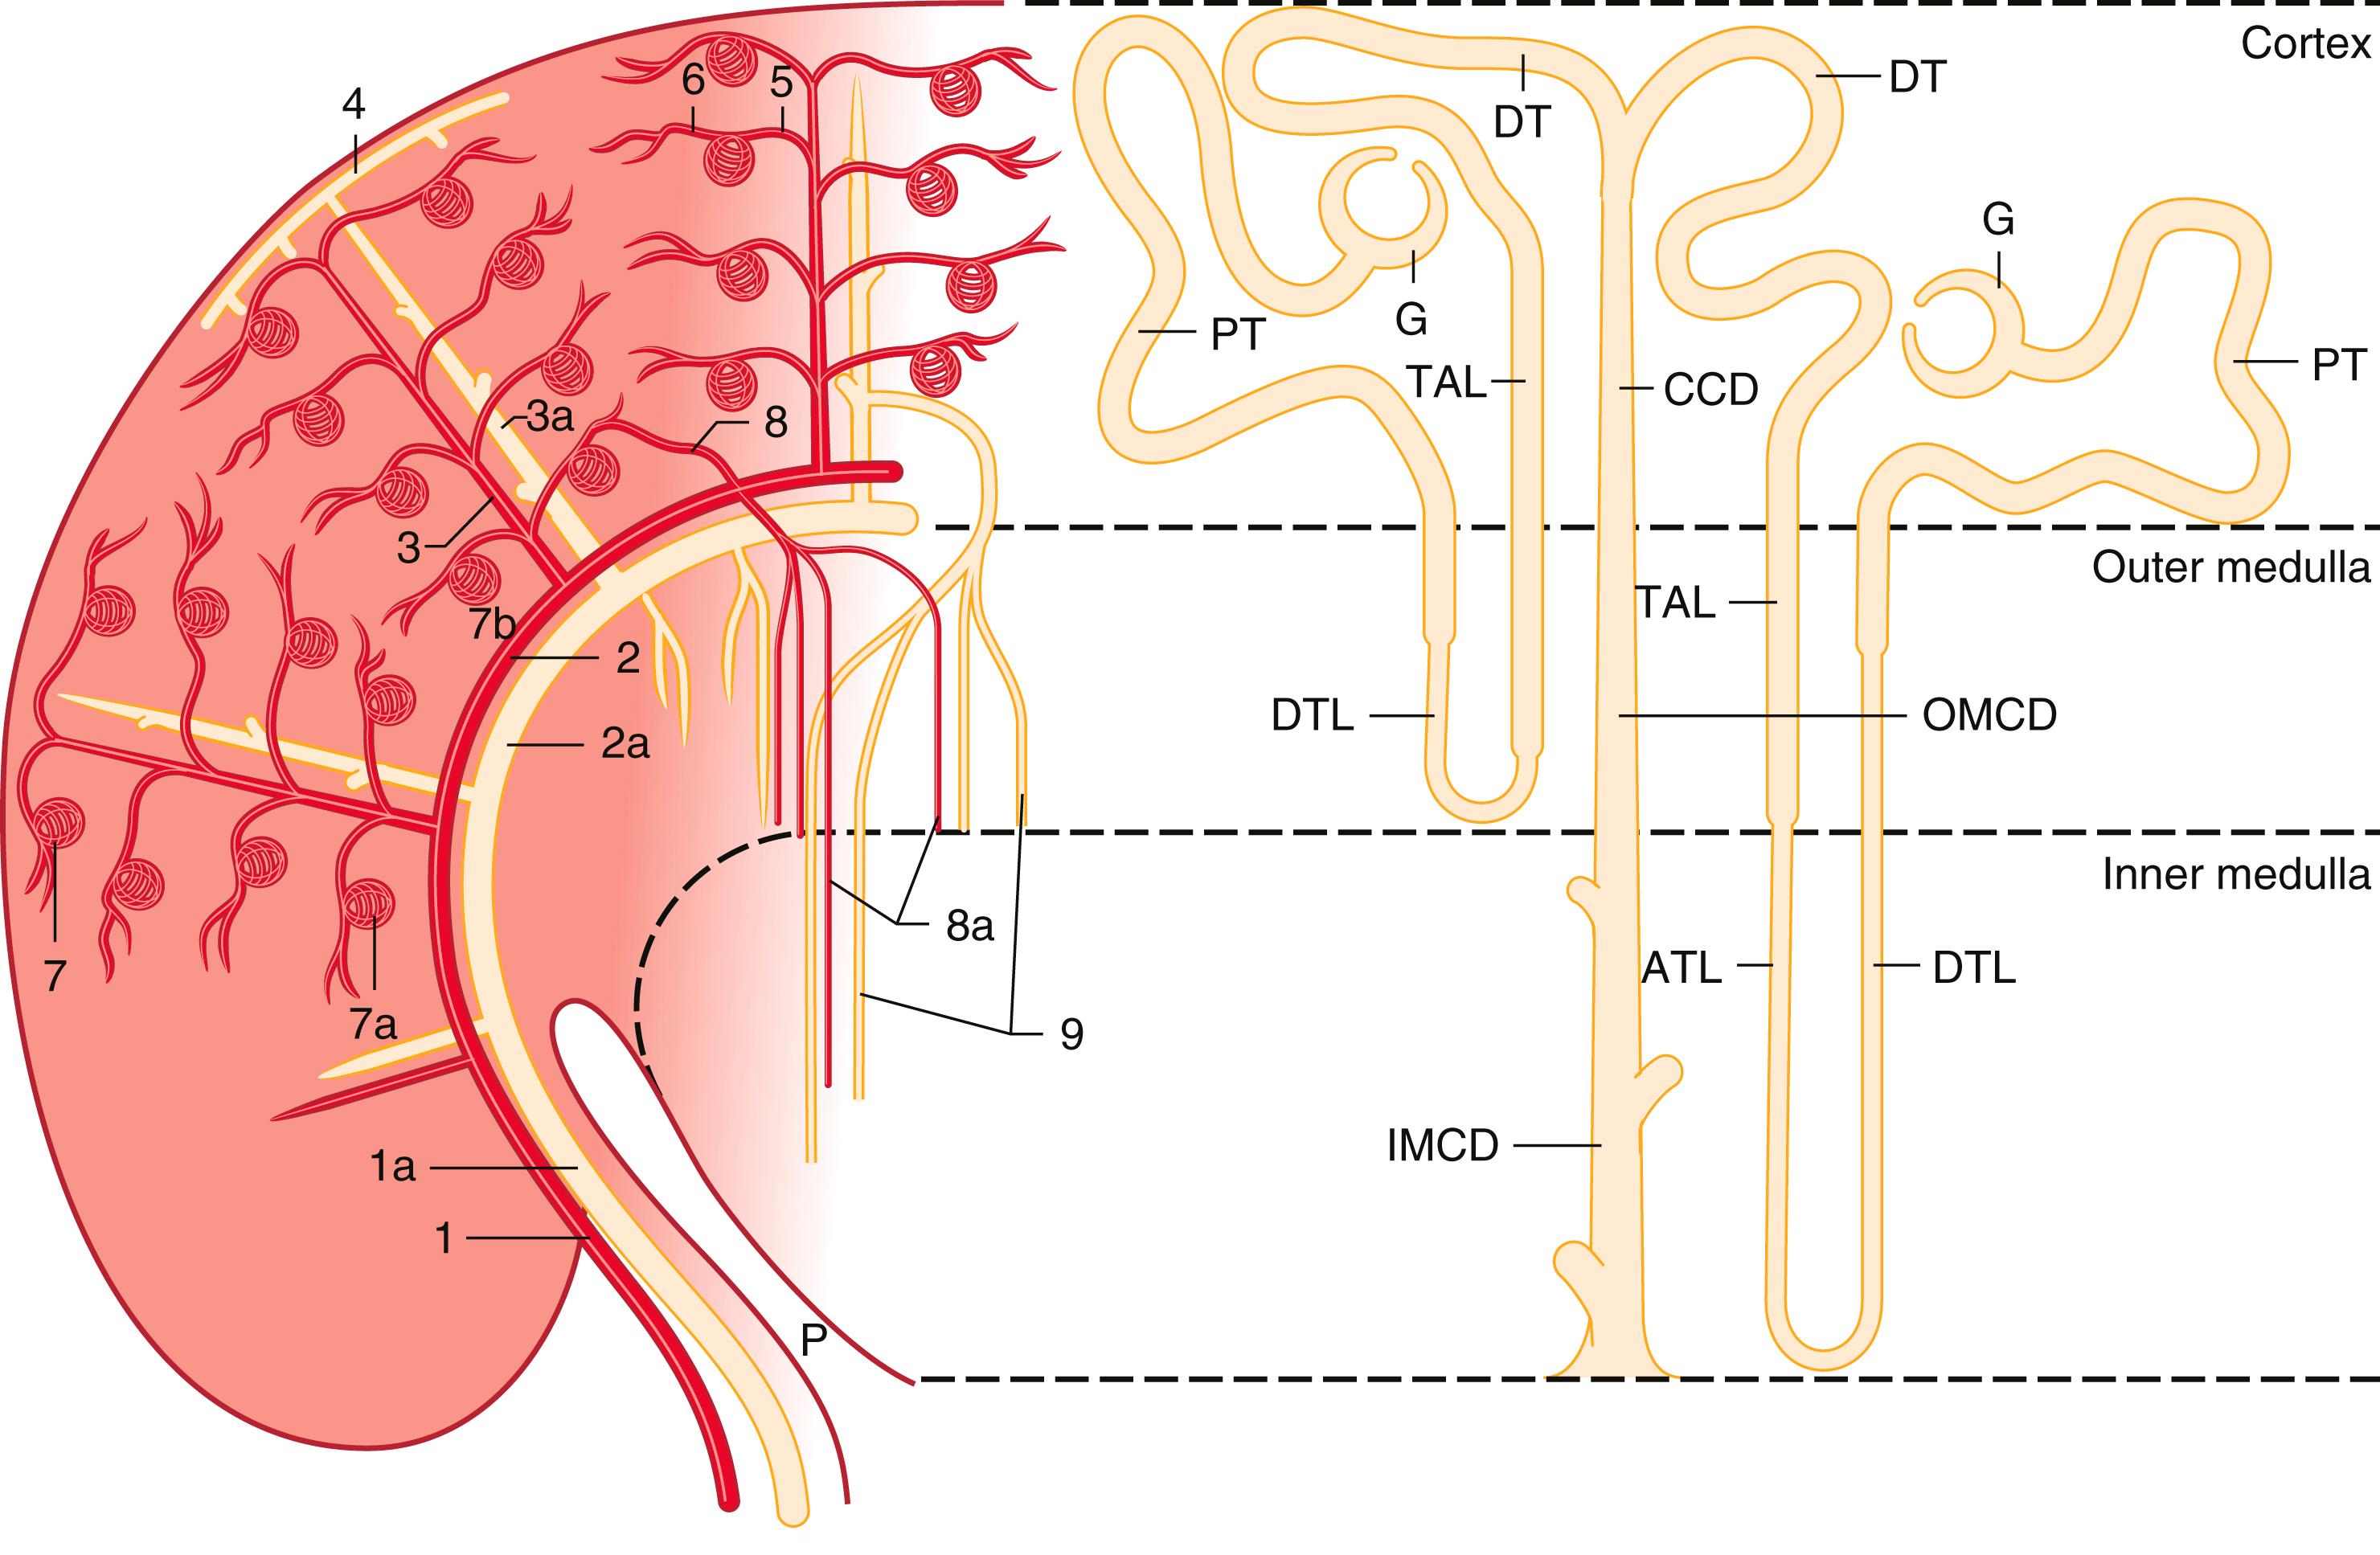 Fig. 17.1, Anatomic relationships of the nephron and the renal vasculature.